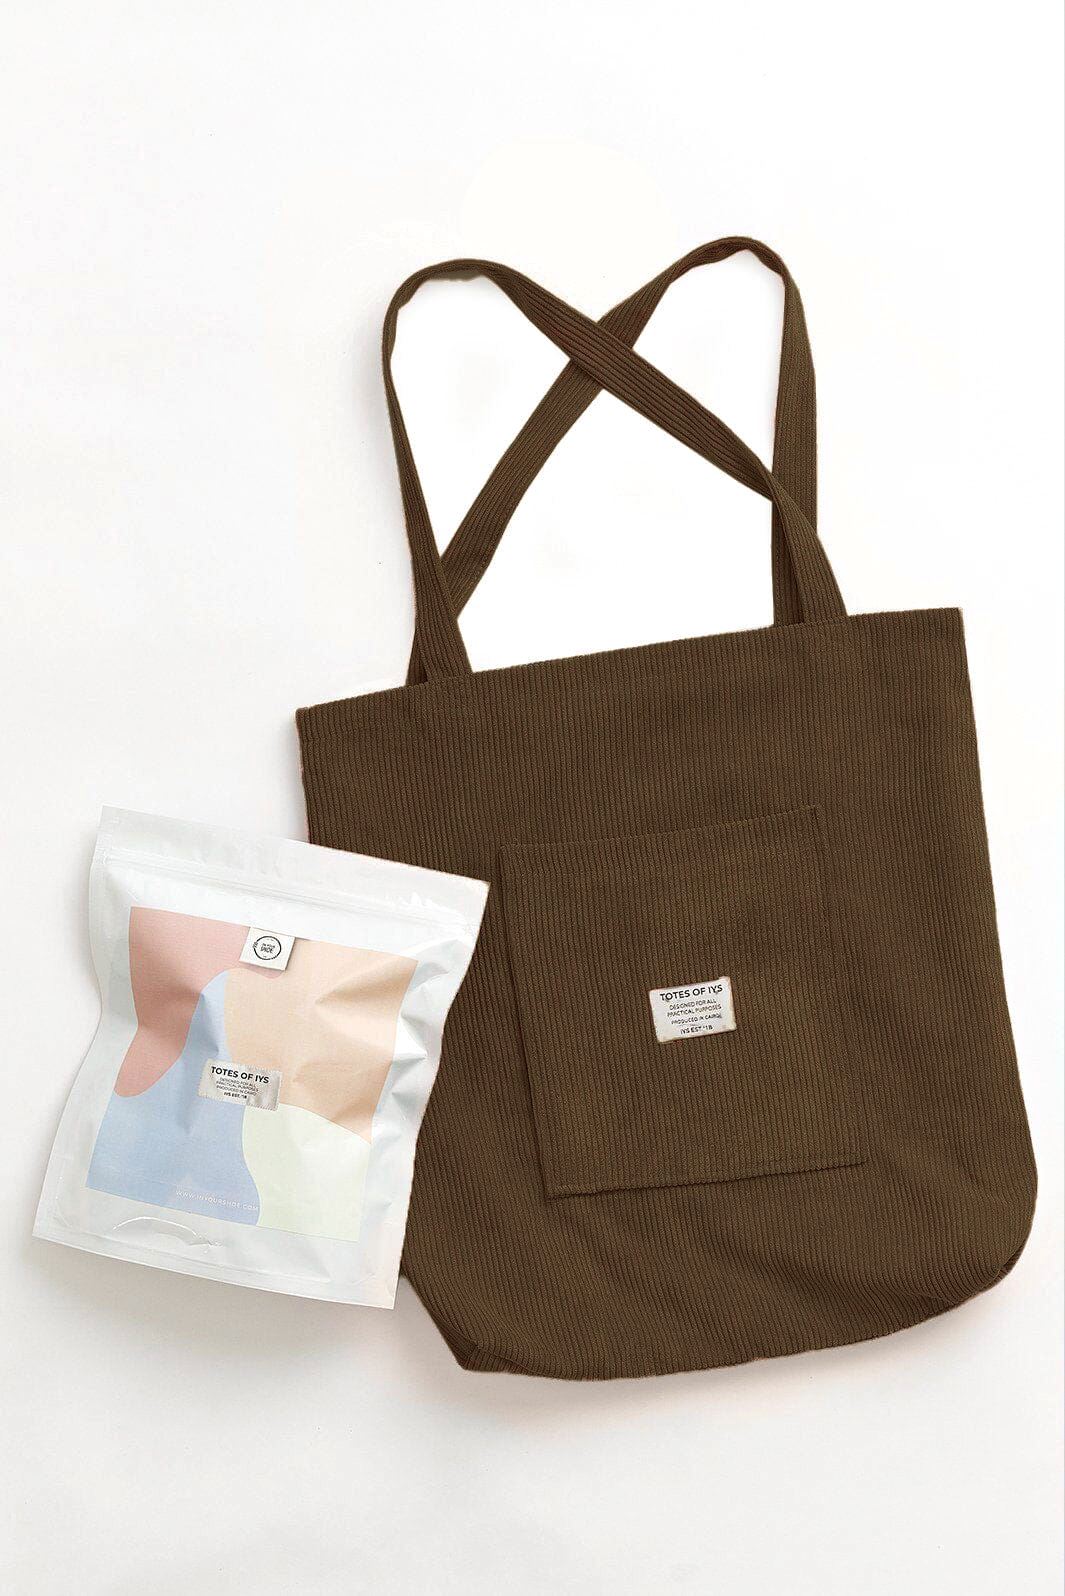 Cumin Tote Totes IN YOUR SHOE 